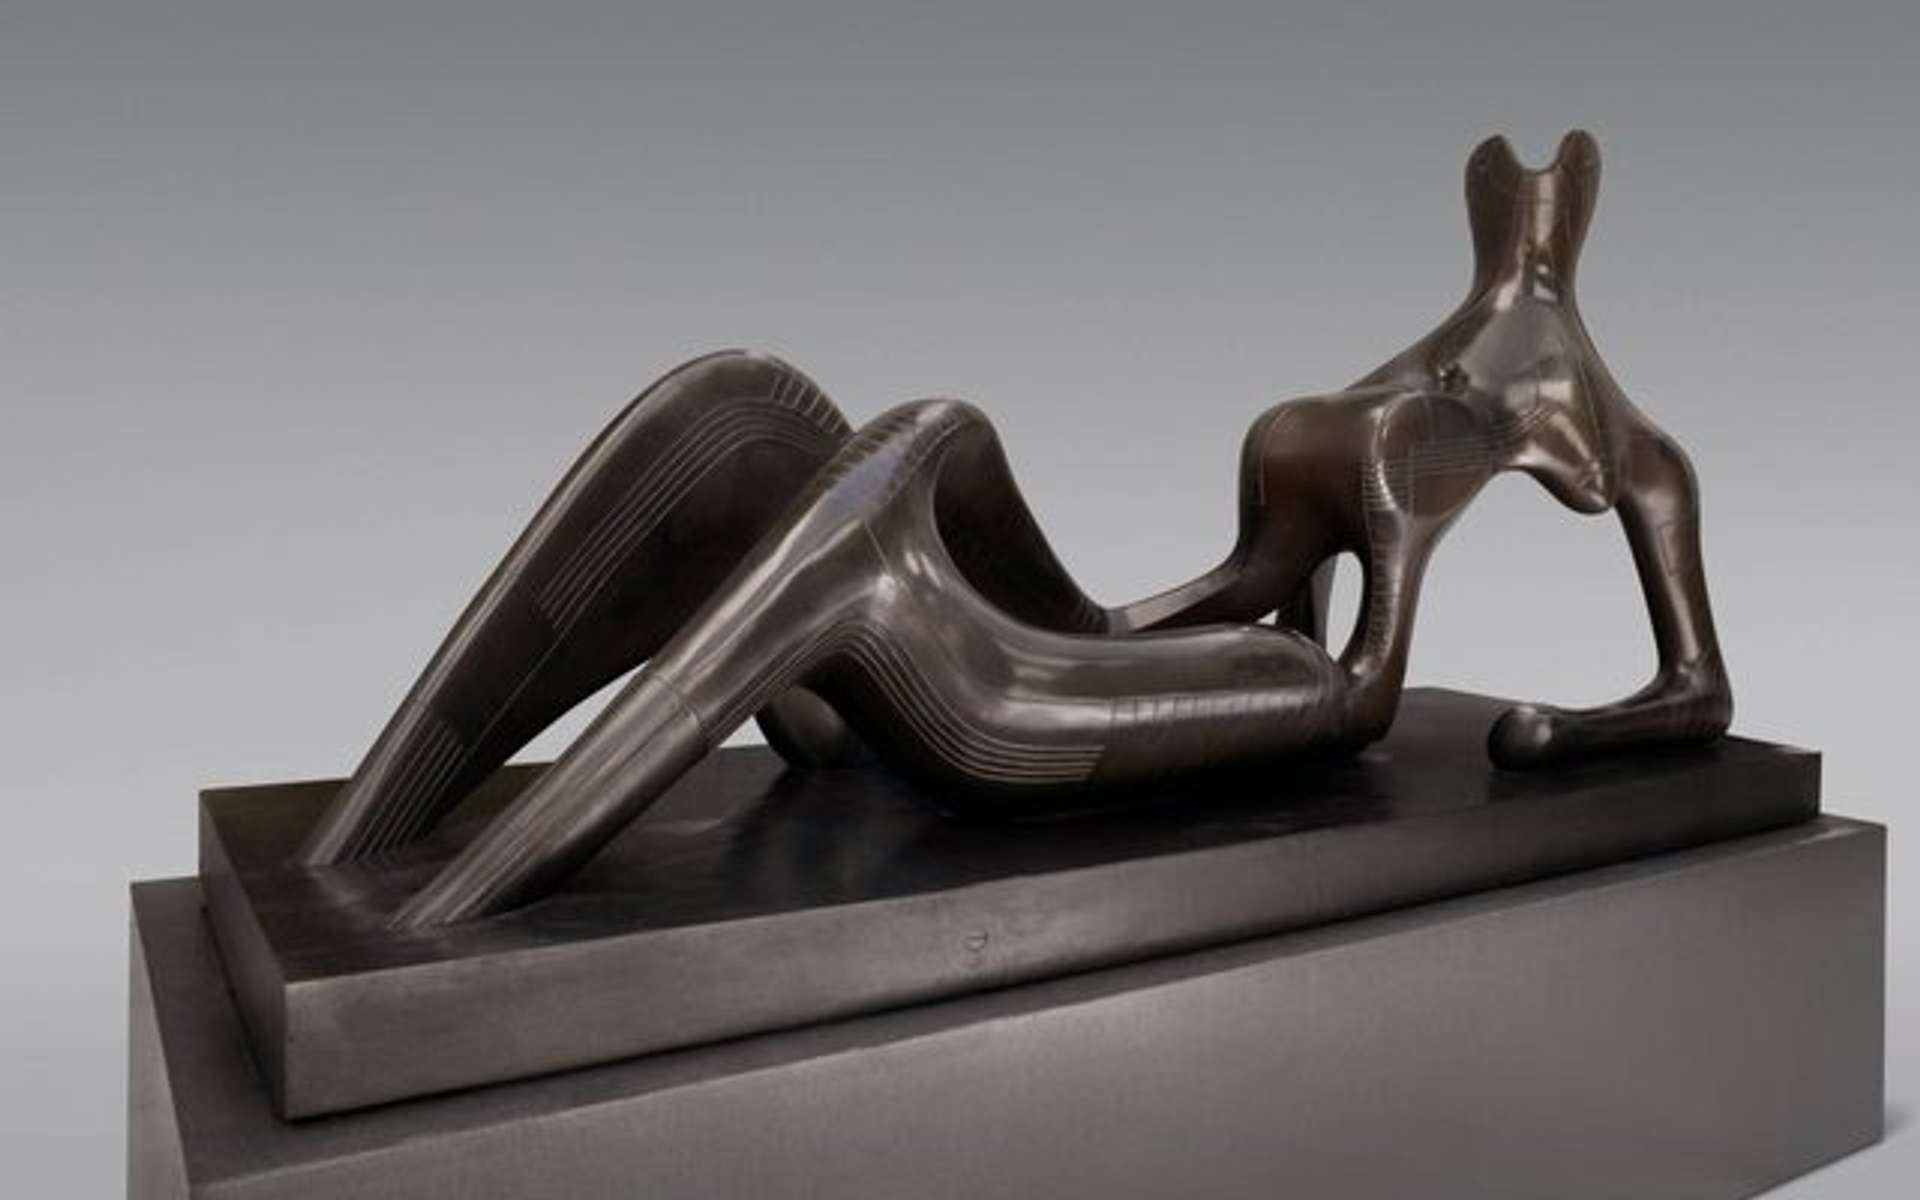 A bronze sculpture depicting an abstract reclining figure on a pedestal, with bent knees and resting on the forearms.